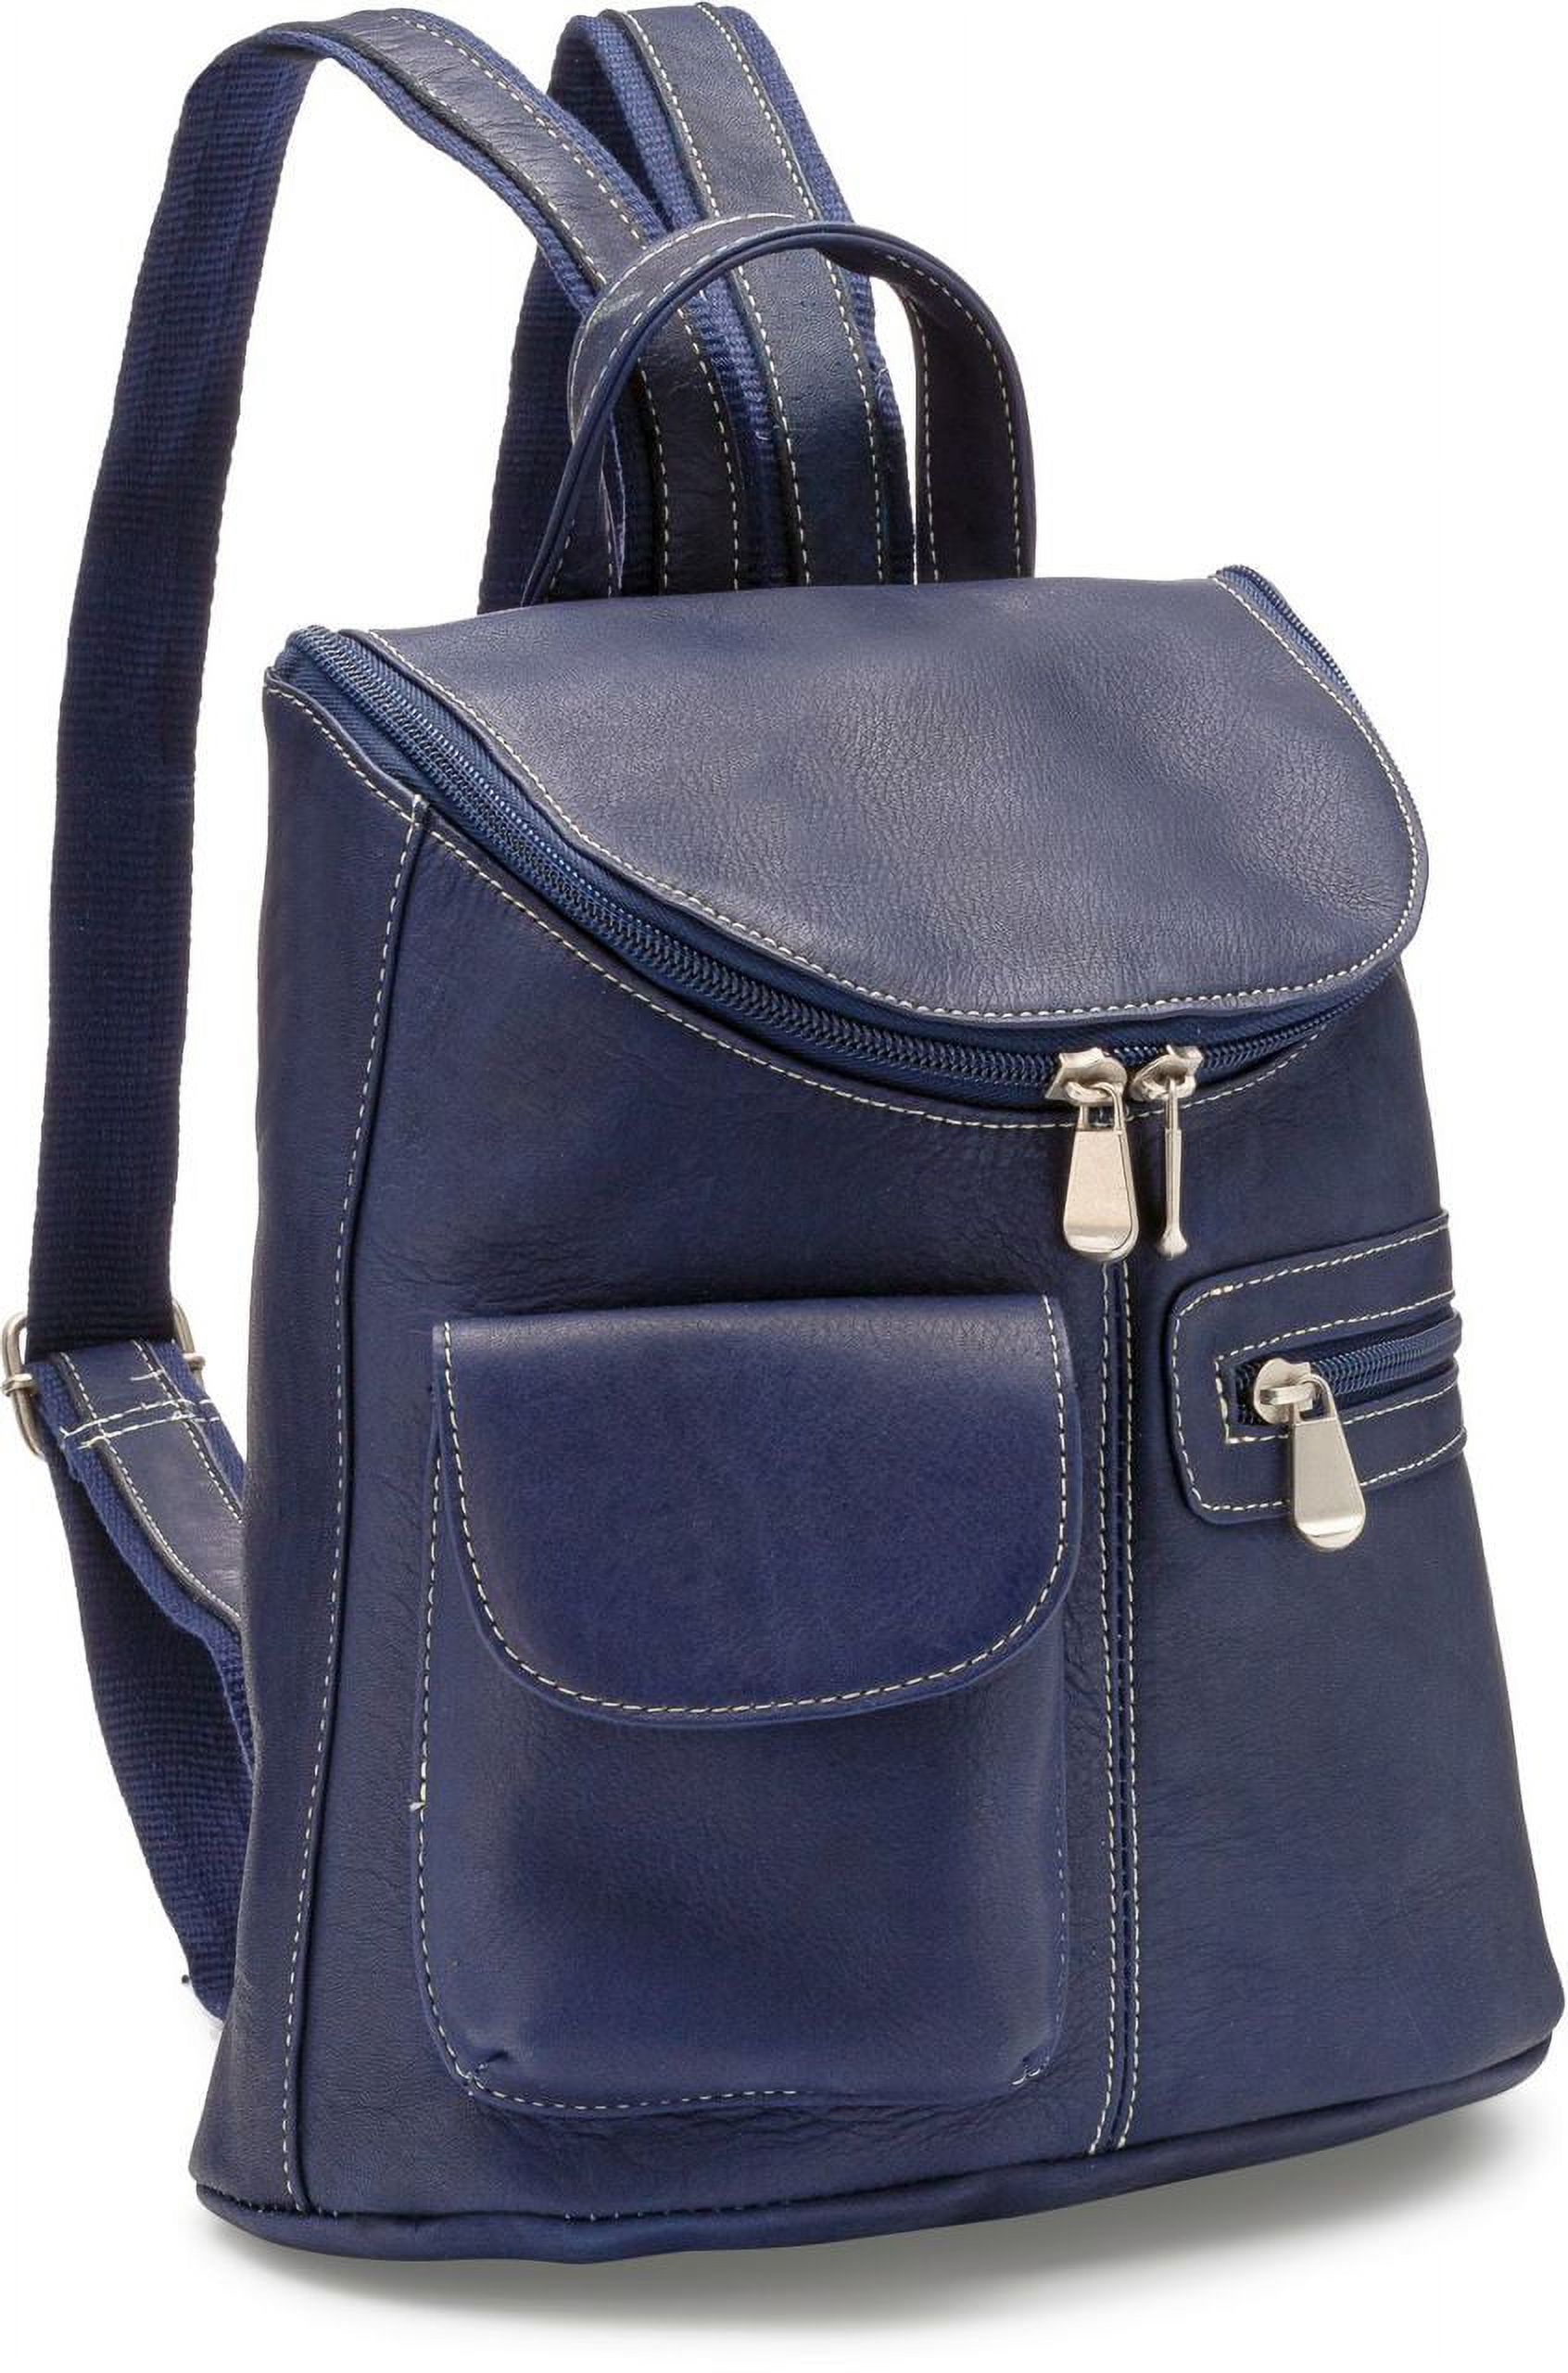 Le Donne Leather Lafayette Classic Backpack LD-9108 - image 1 of 5